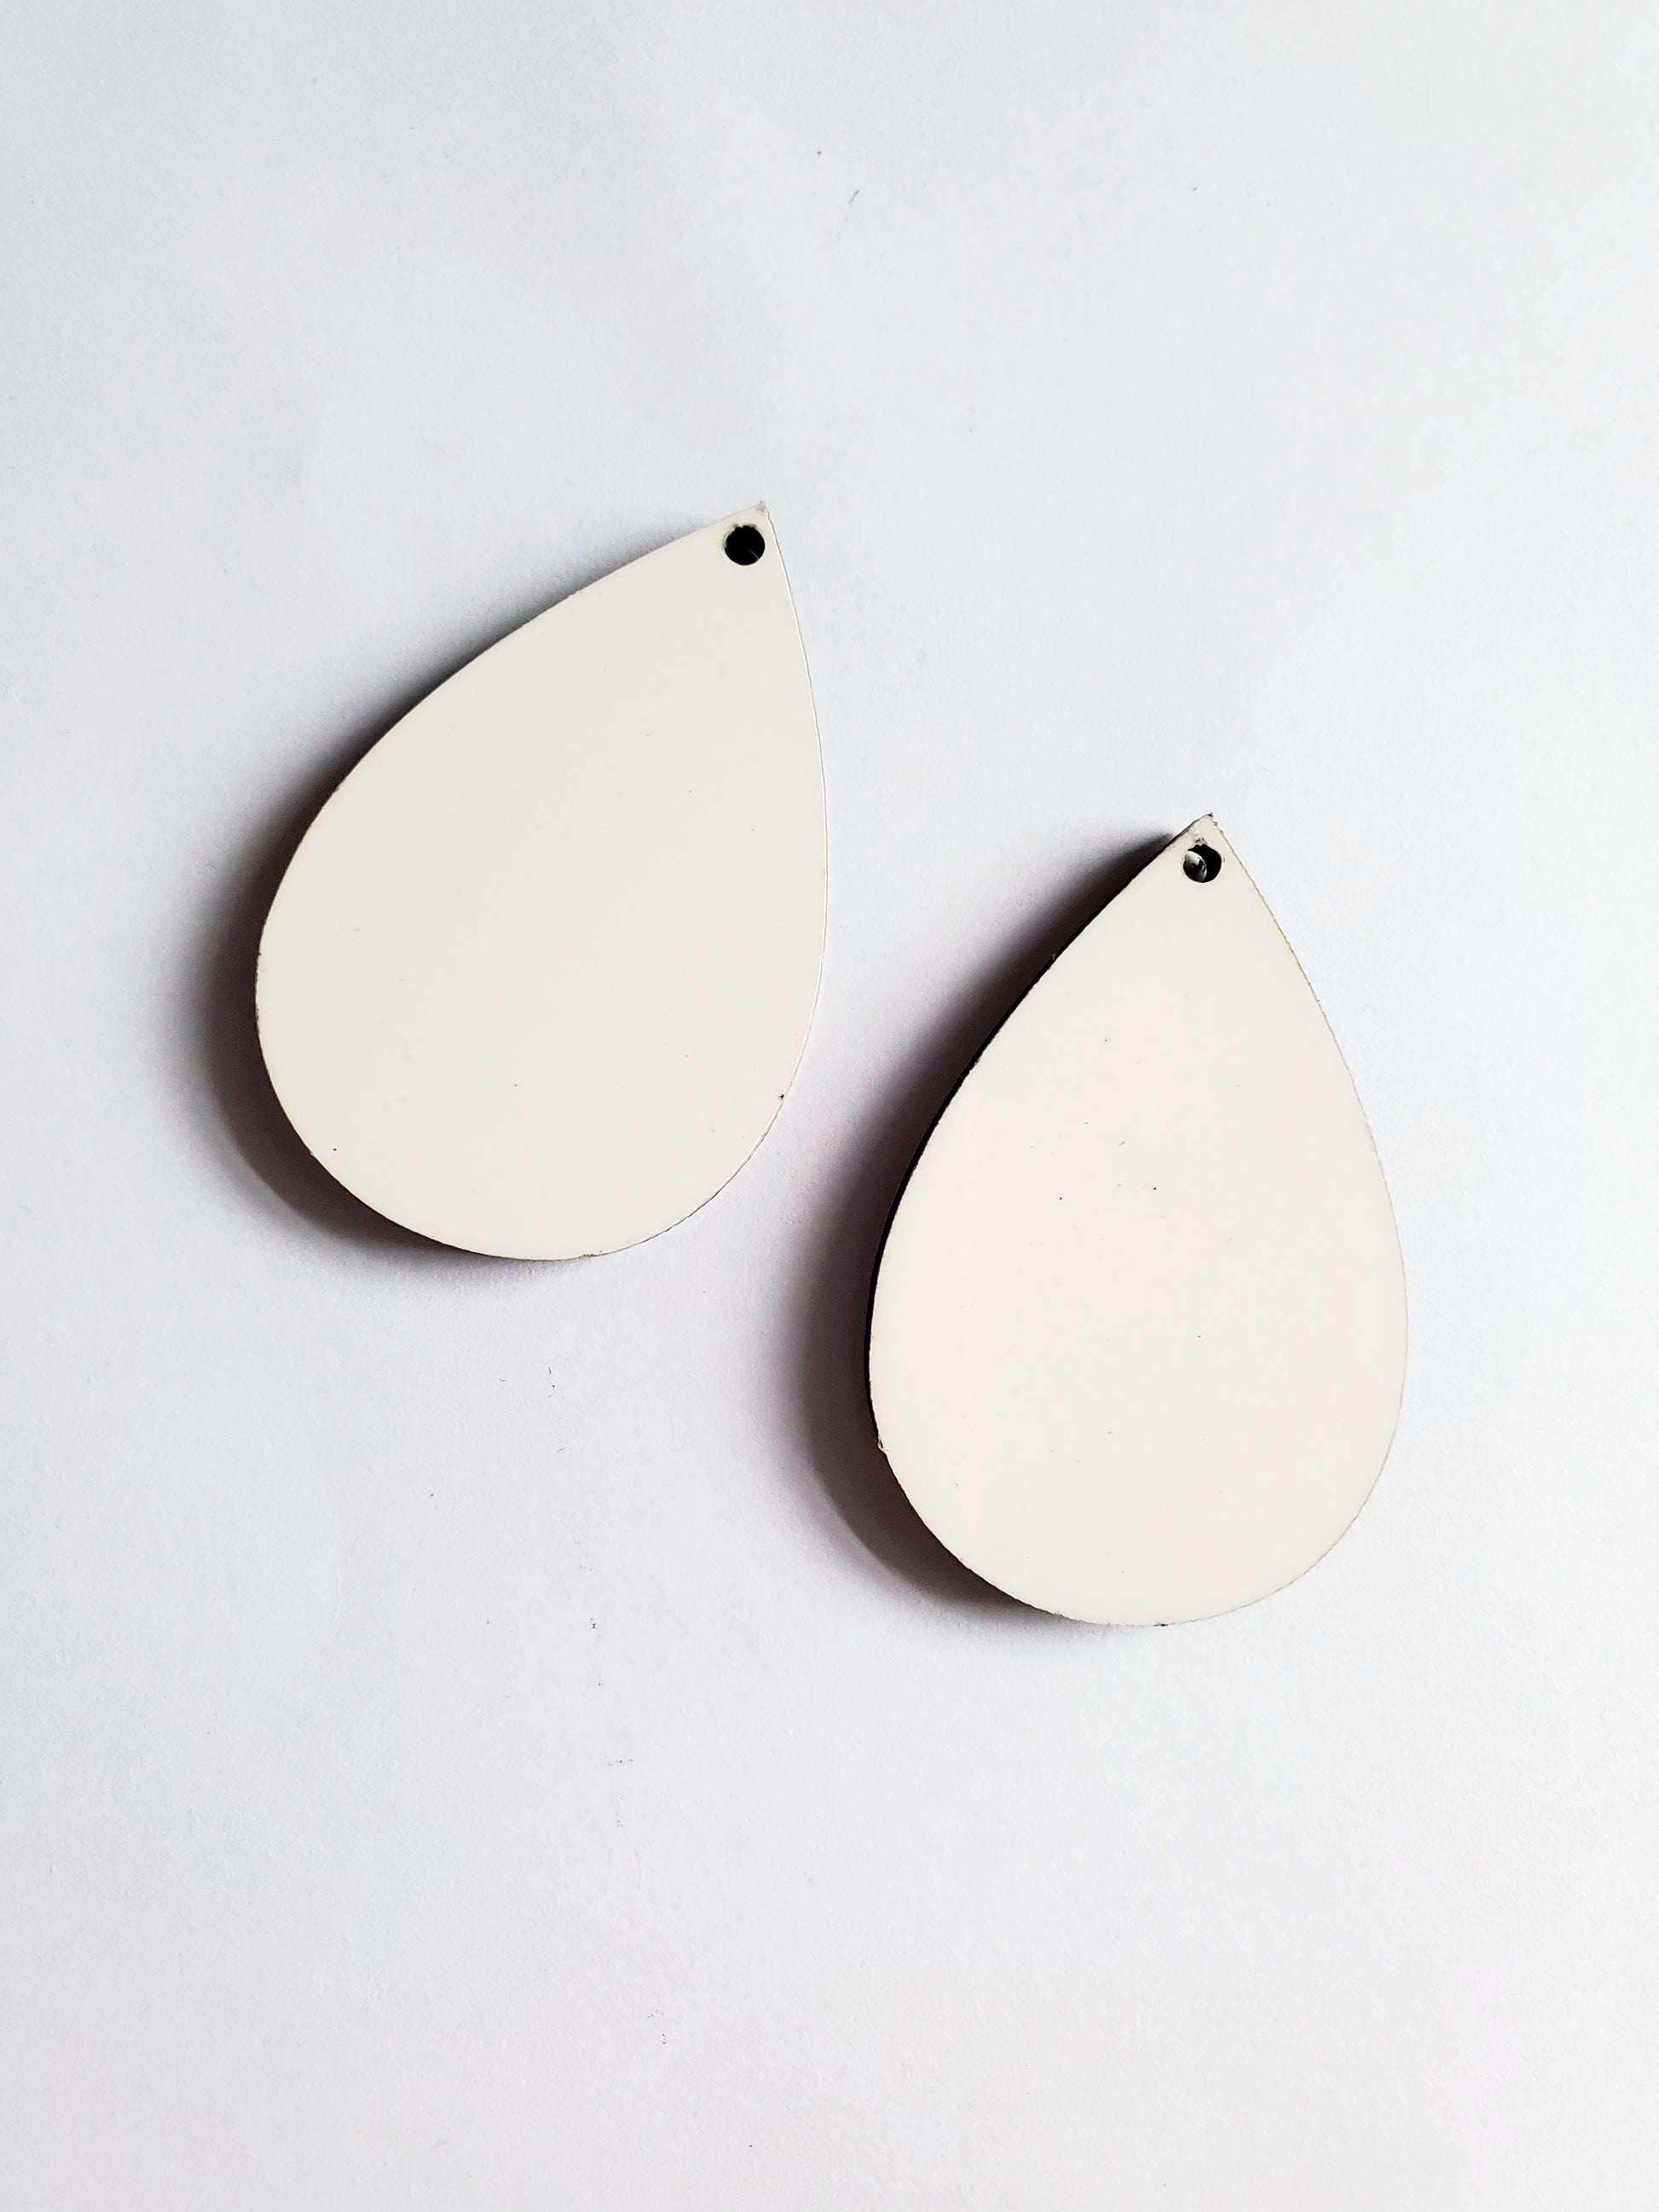 blank Aluminum dangle earrings for sublimation white Aluminum round drop  earrings hot transfer printing consumables 15pair/lot